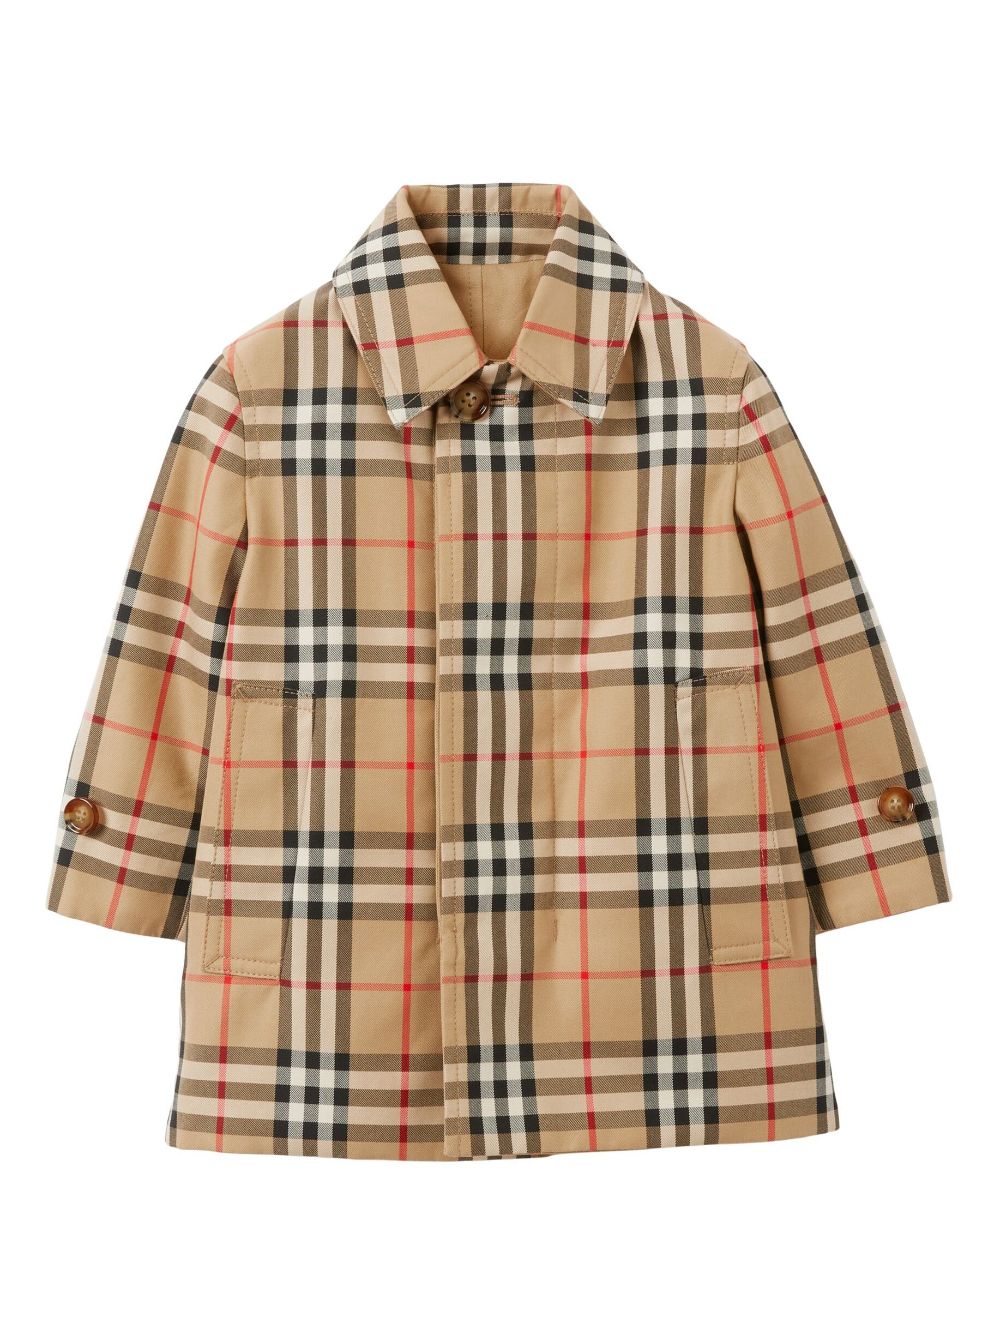 Burberry Kids checked reversible trench coat - ARCHIVE BEIGE IP CHK